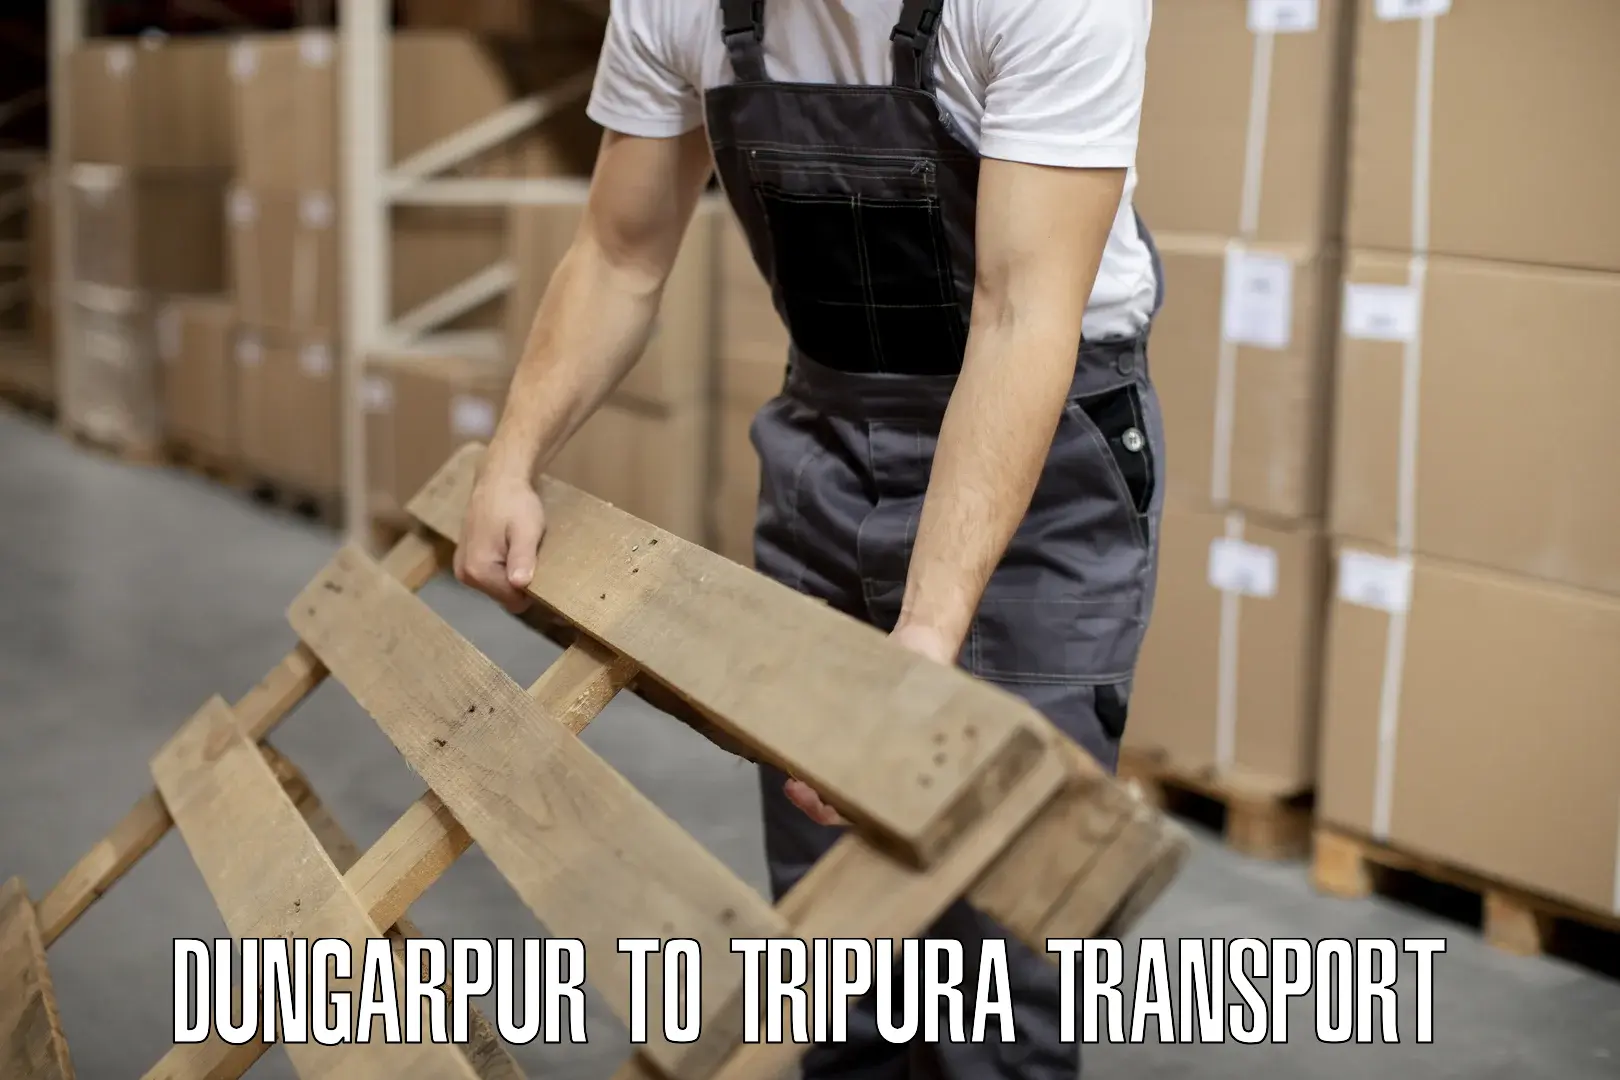 Delivery service Dungarpur to Tripura